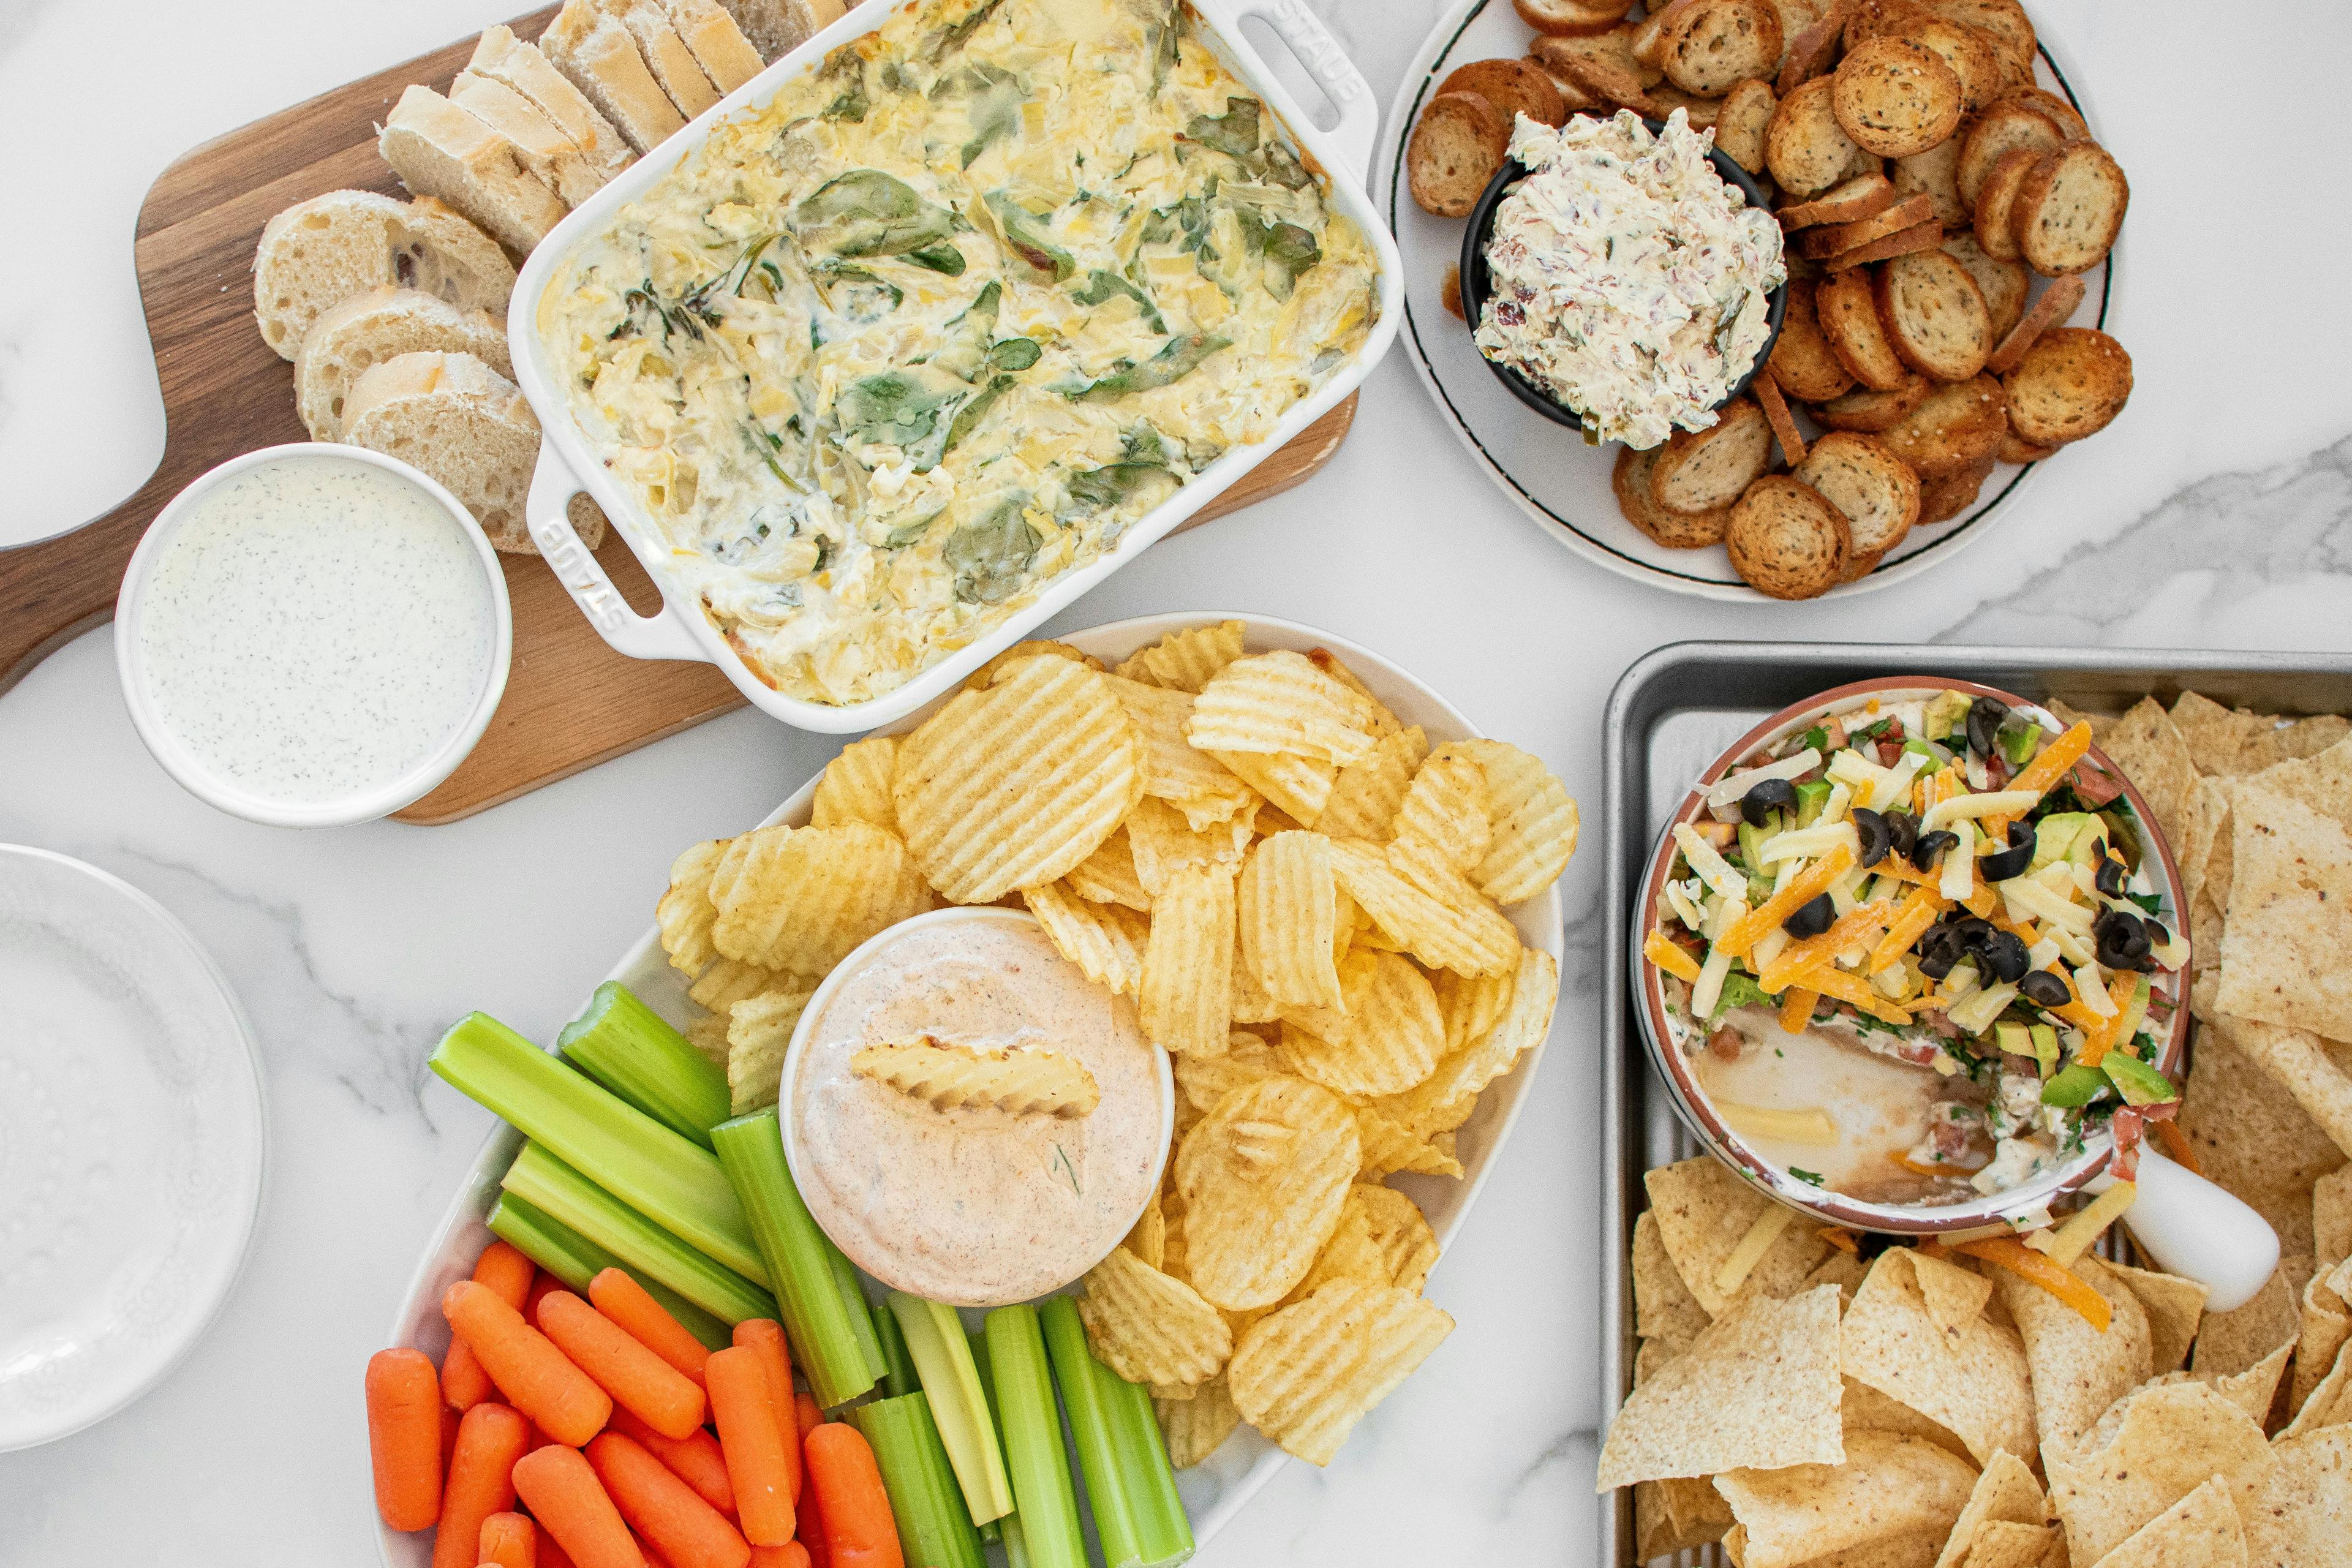 Game day dips displayed with chips, veggies and bread.